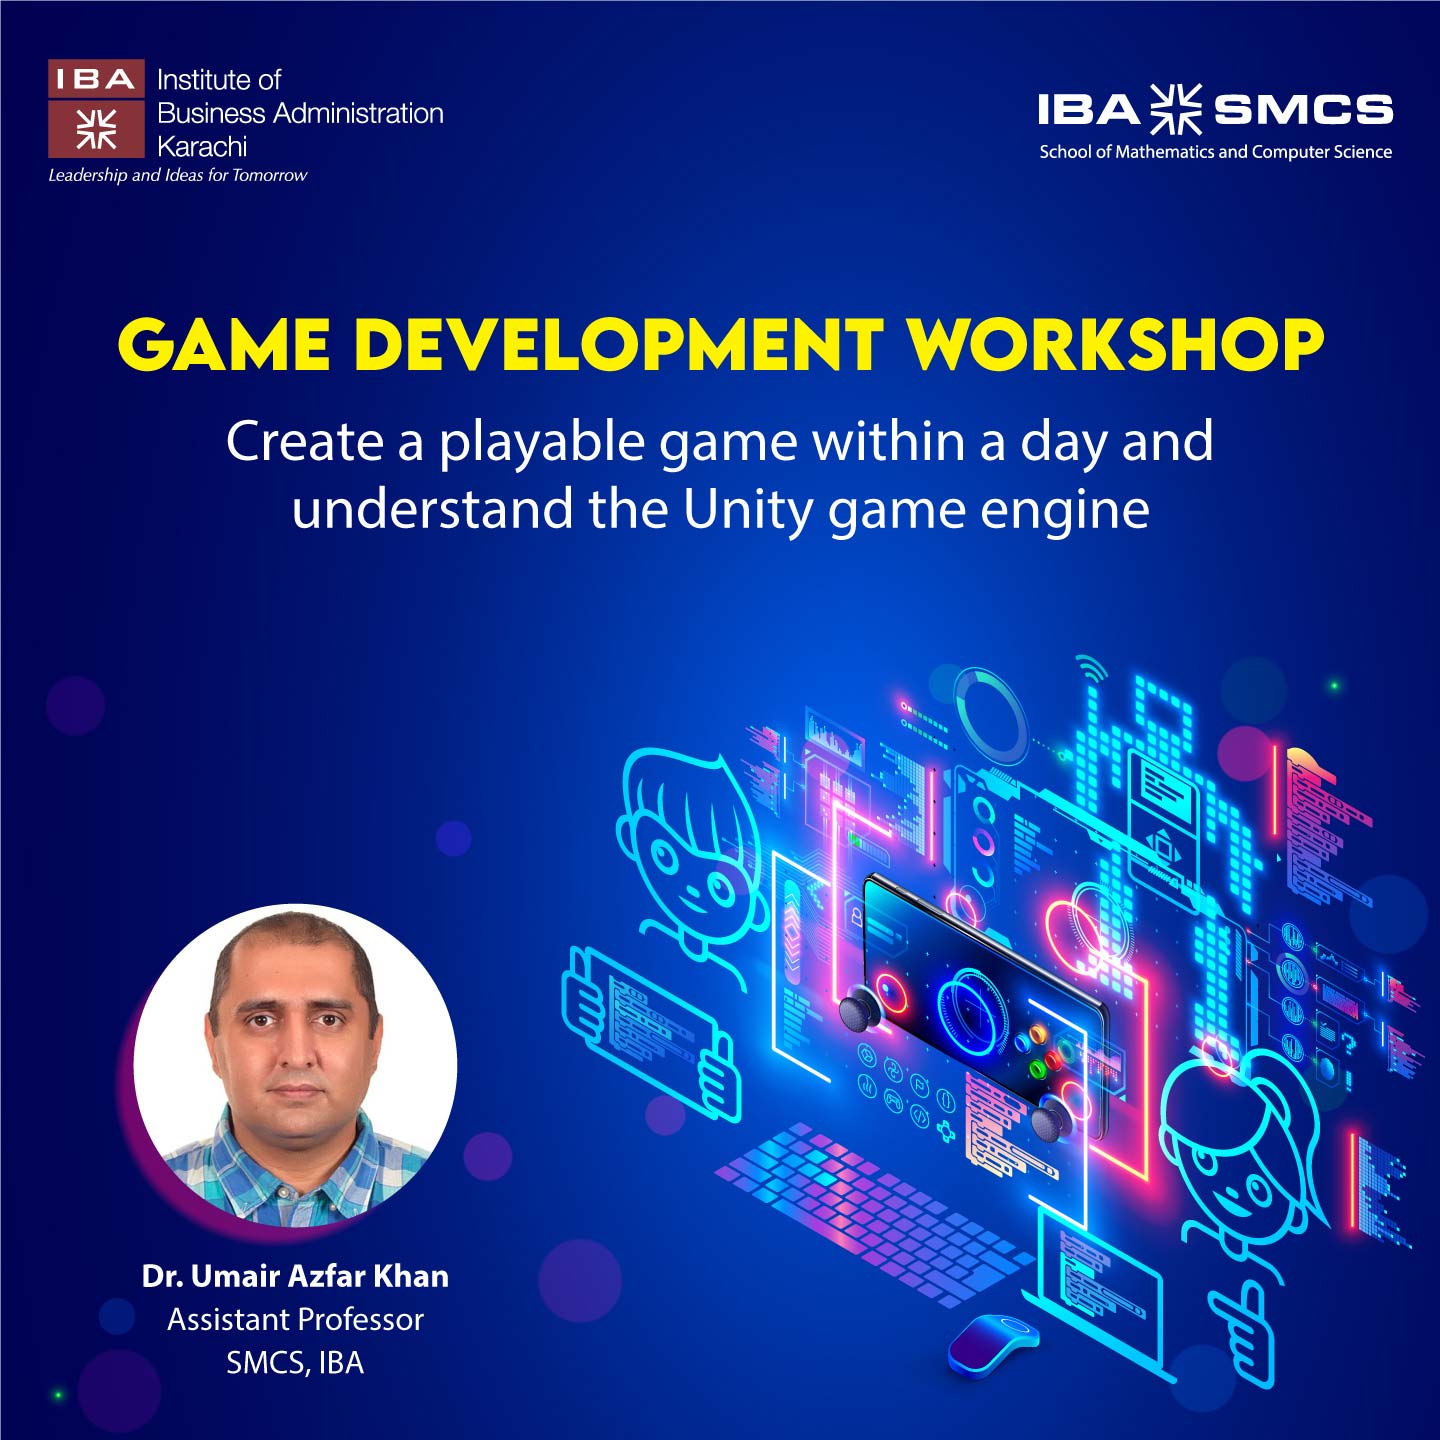 A workshop on game development was held by the Computer Science society